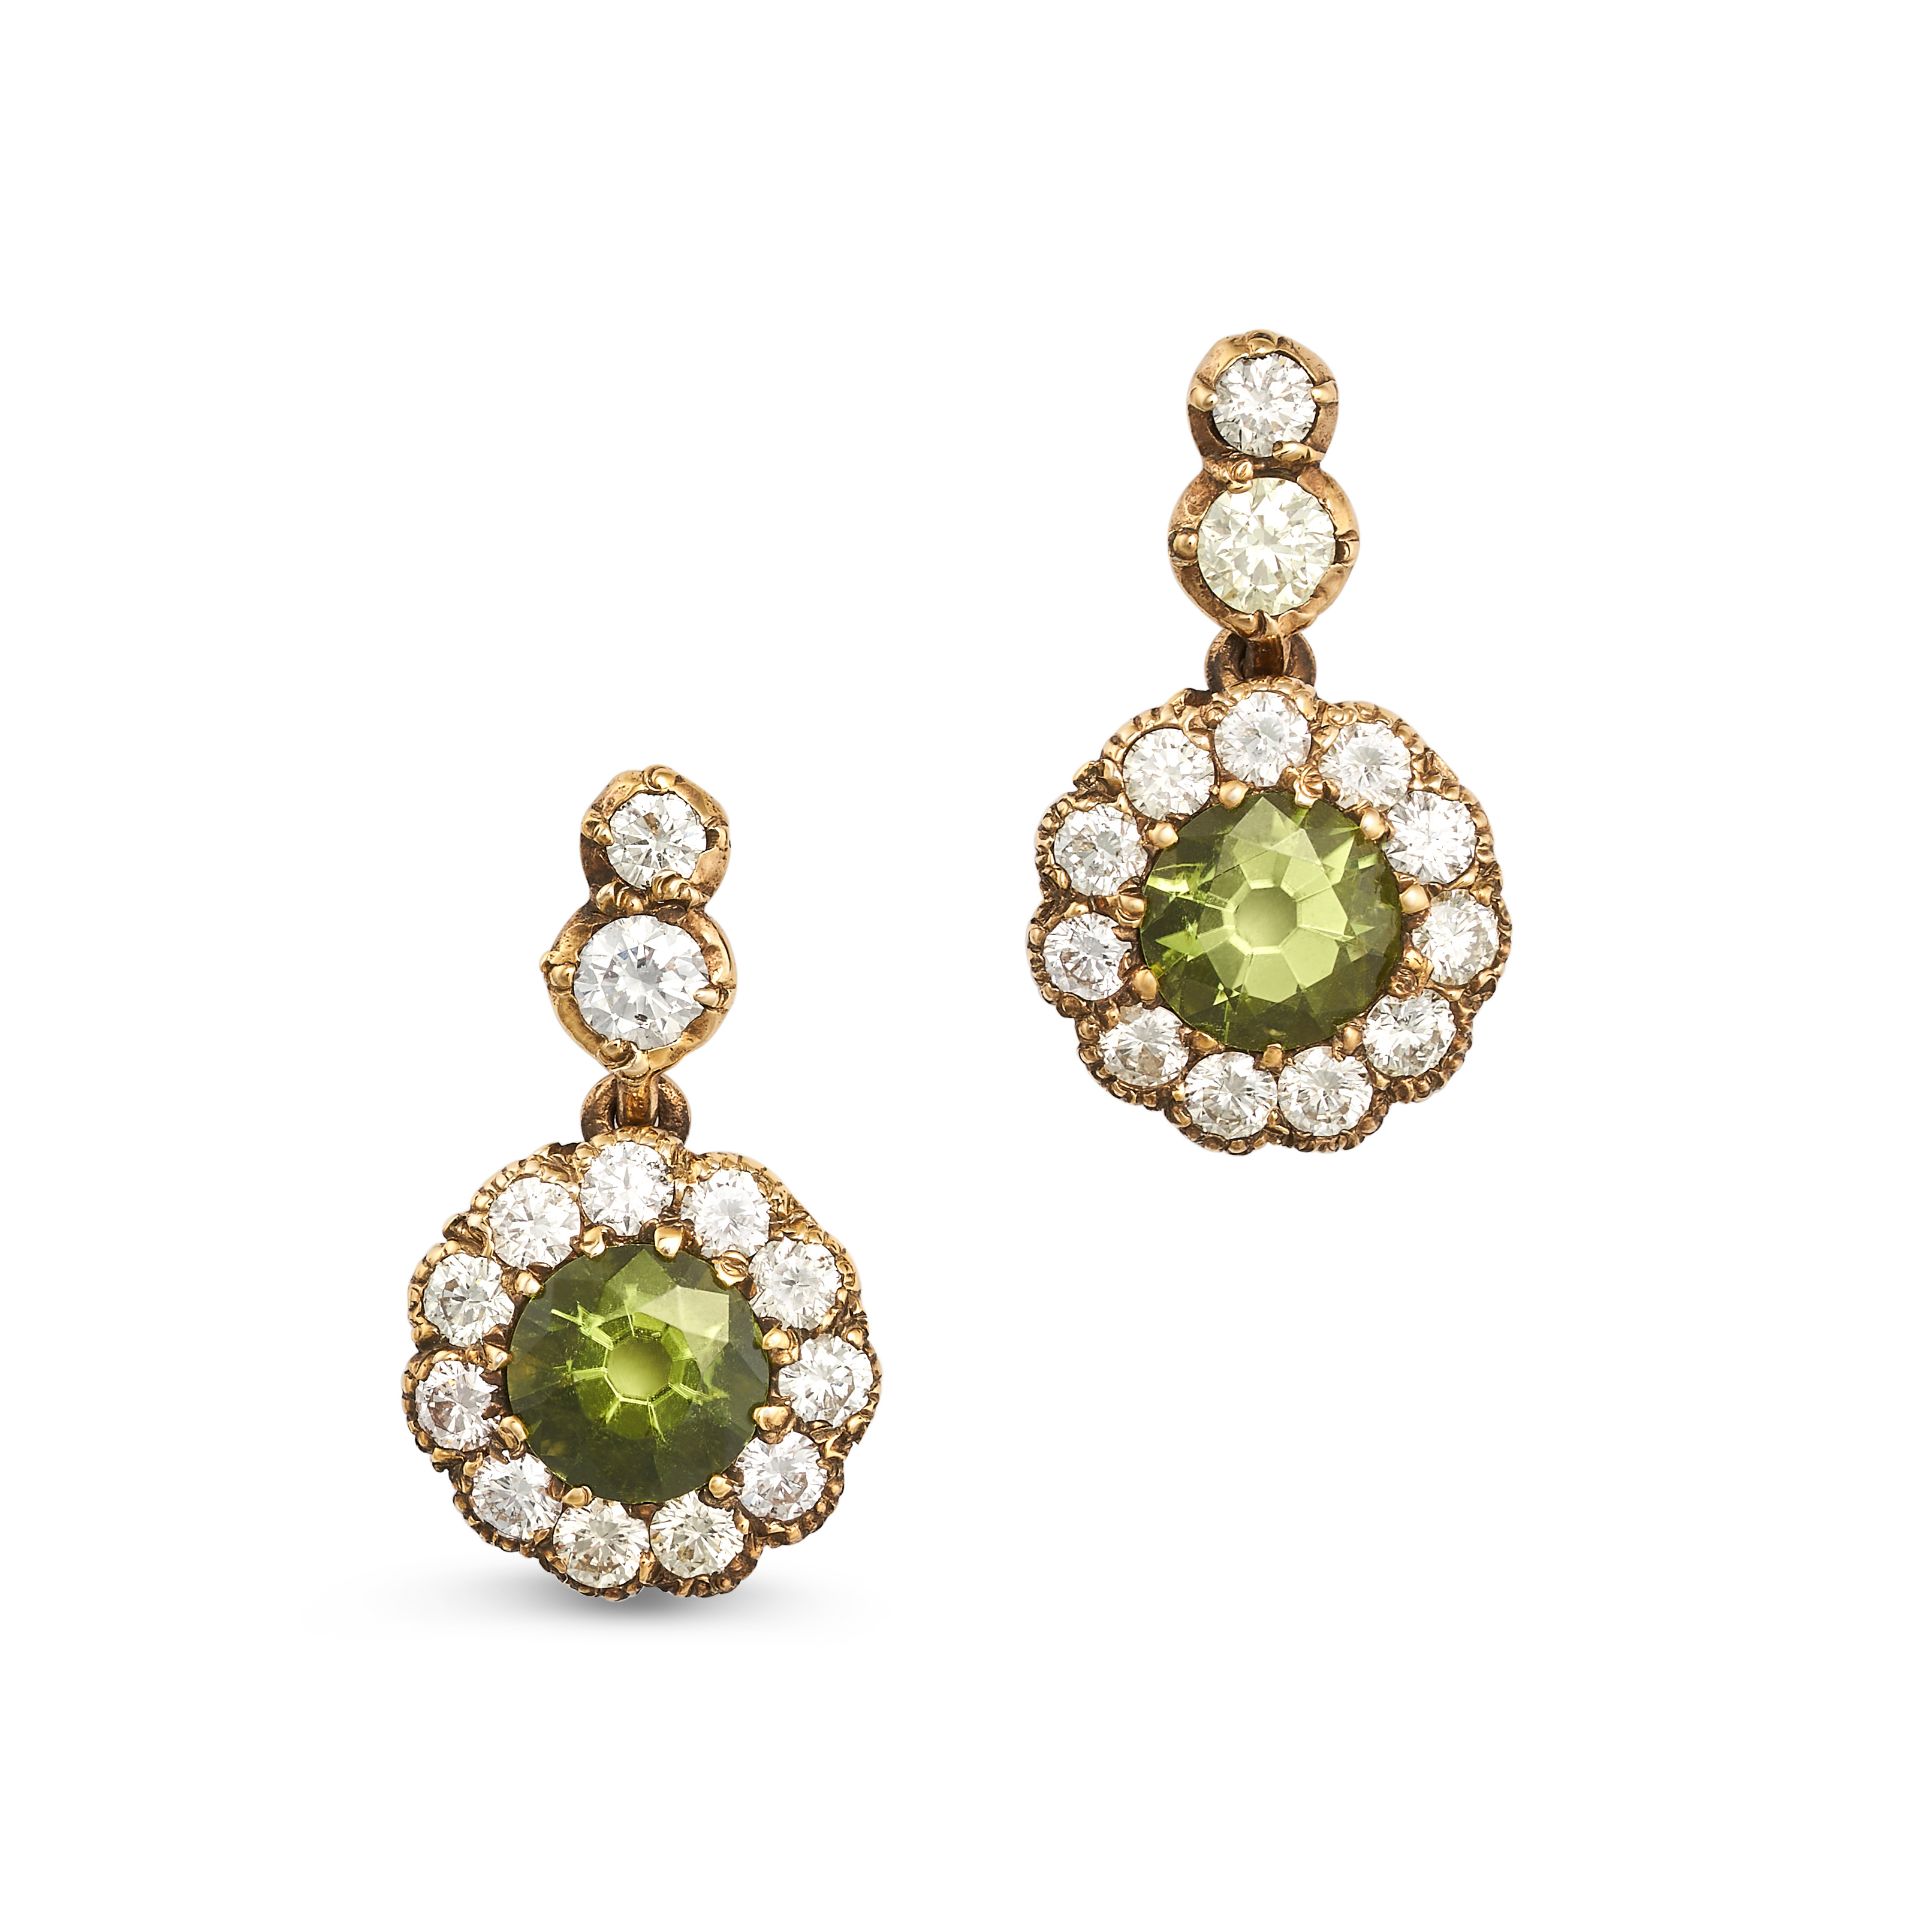 A PAIR OF PERIDOT AND DIAMOND DROP EARRINGS in 18ct yellow gold, each comprising a row of round b...